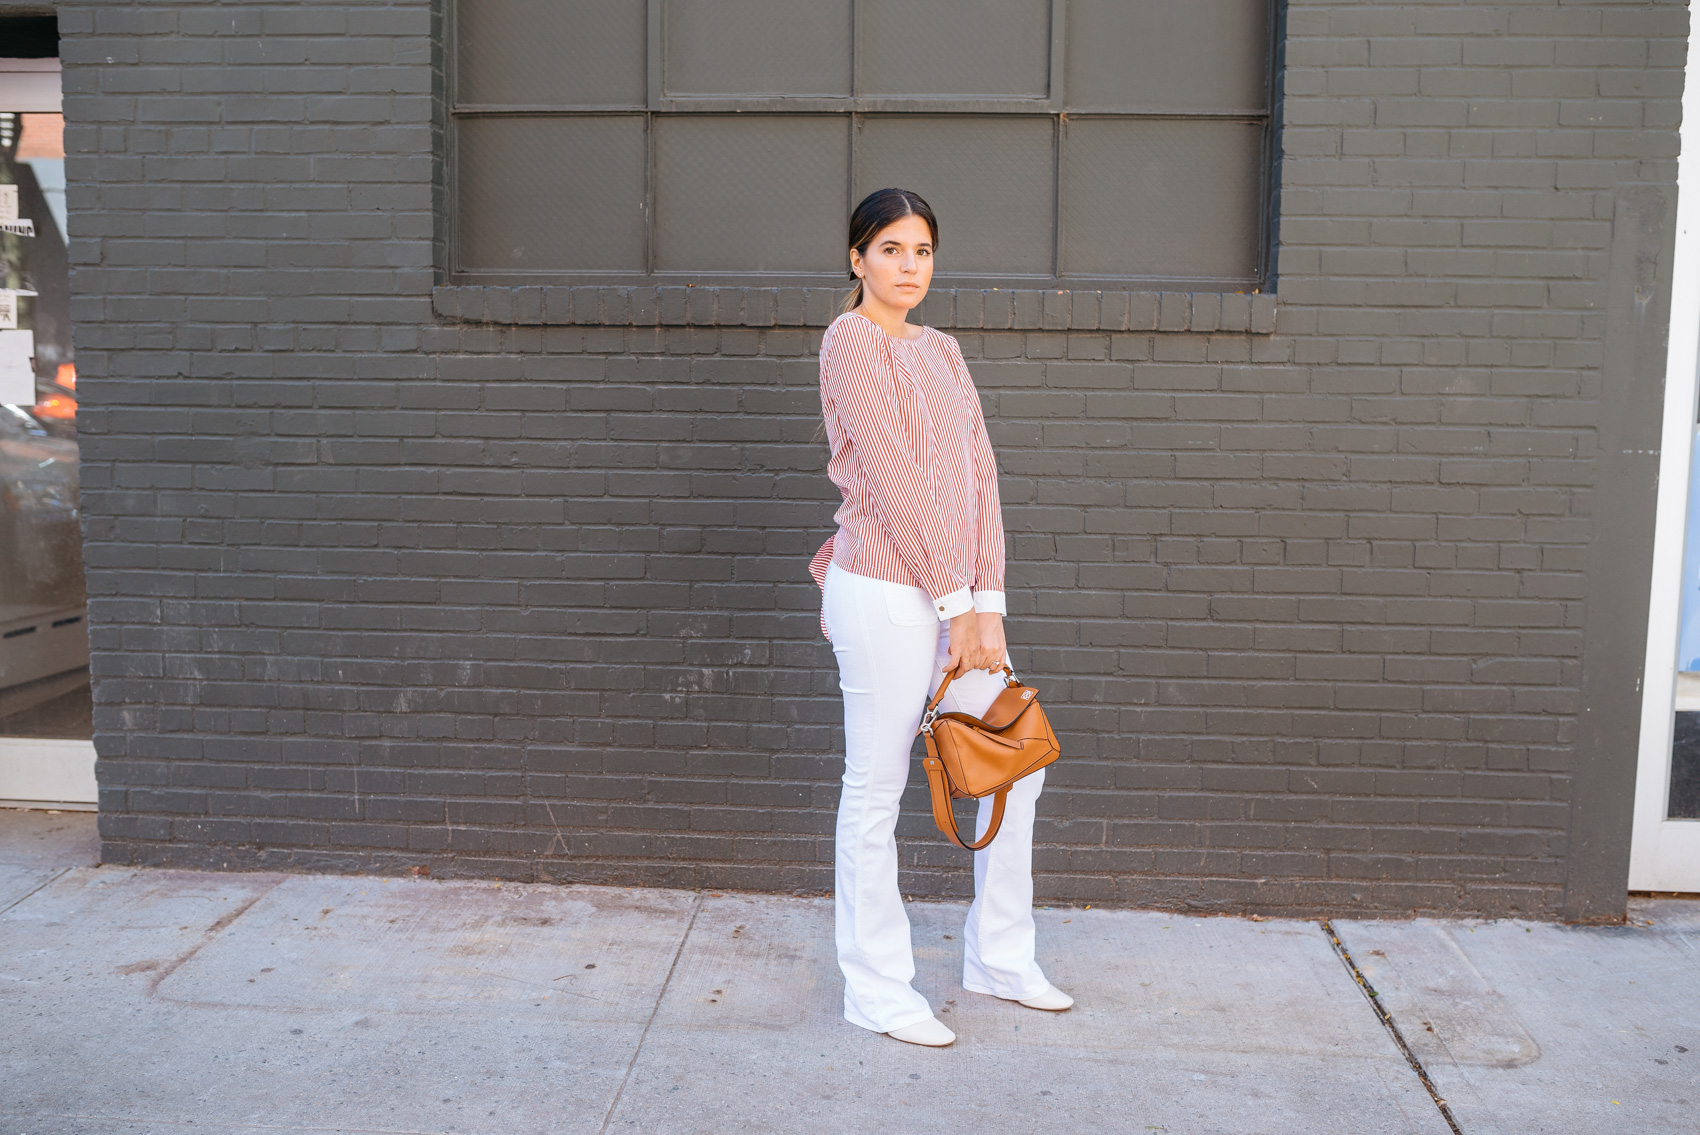 Maristella in a chic open back version of a banker's shirt, flared jeans and Loewe bag